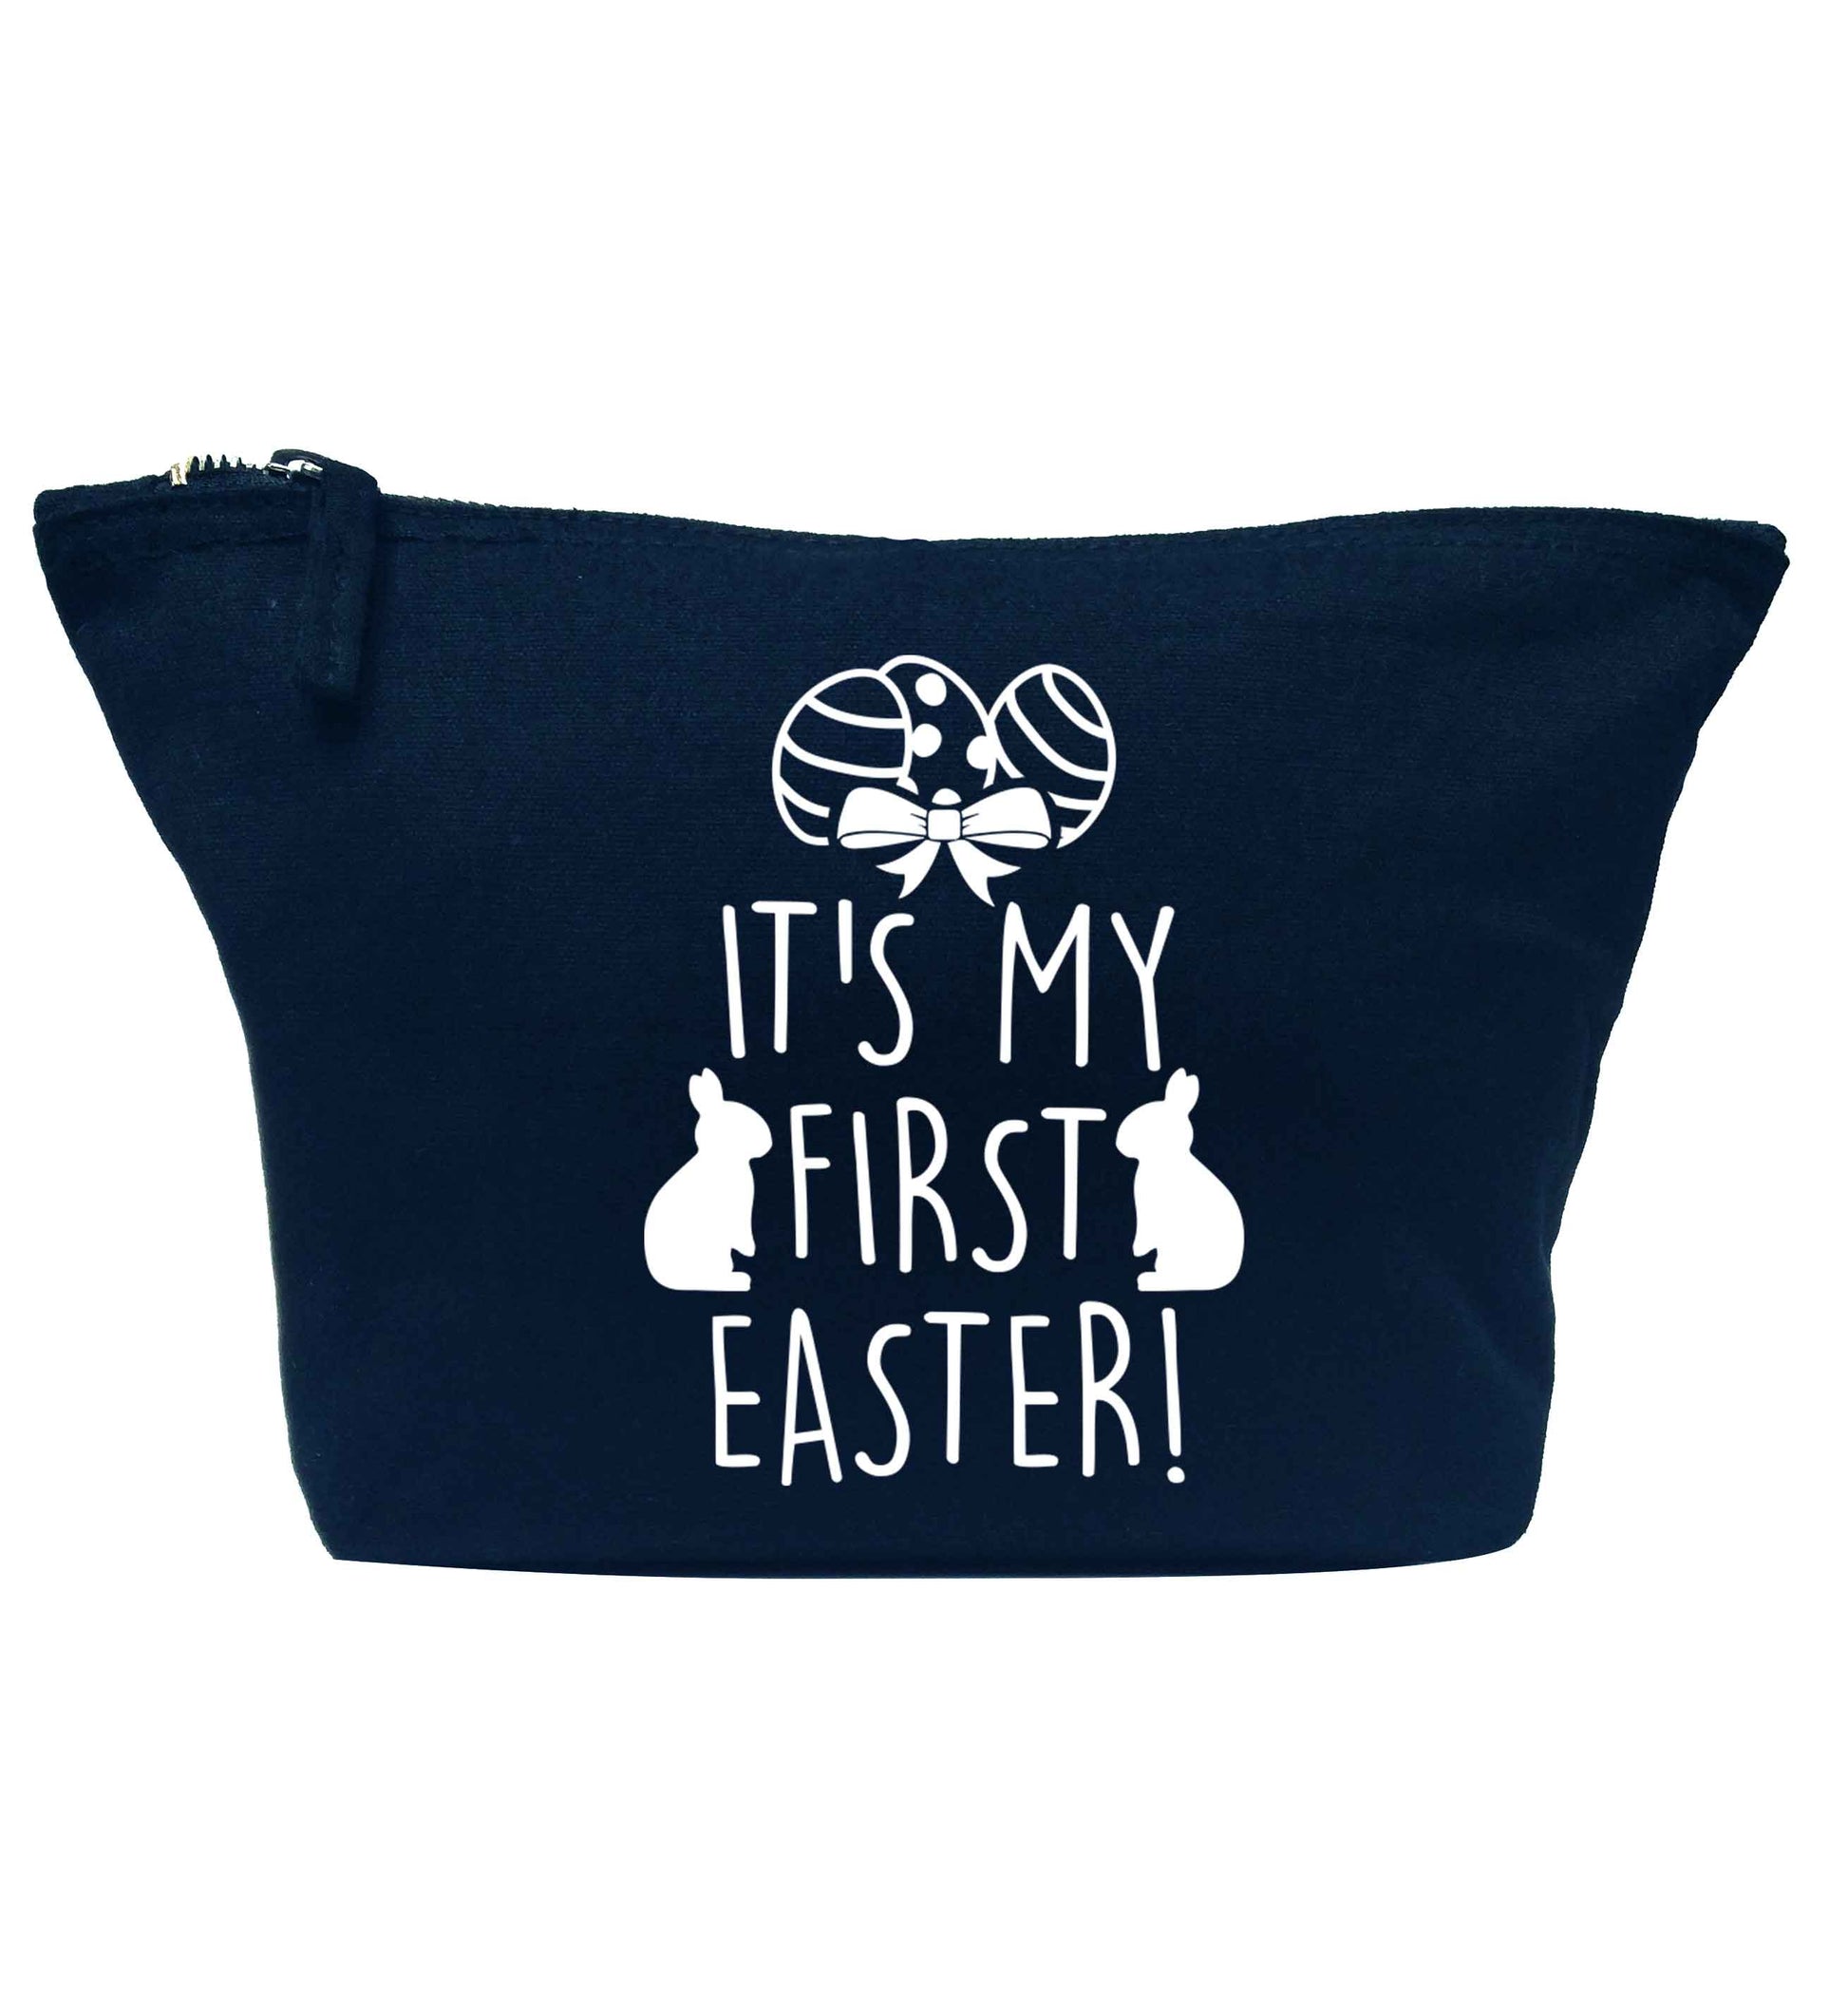 It's my first Easter navy makeup bag